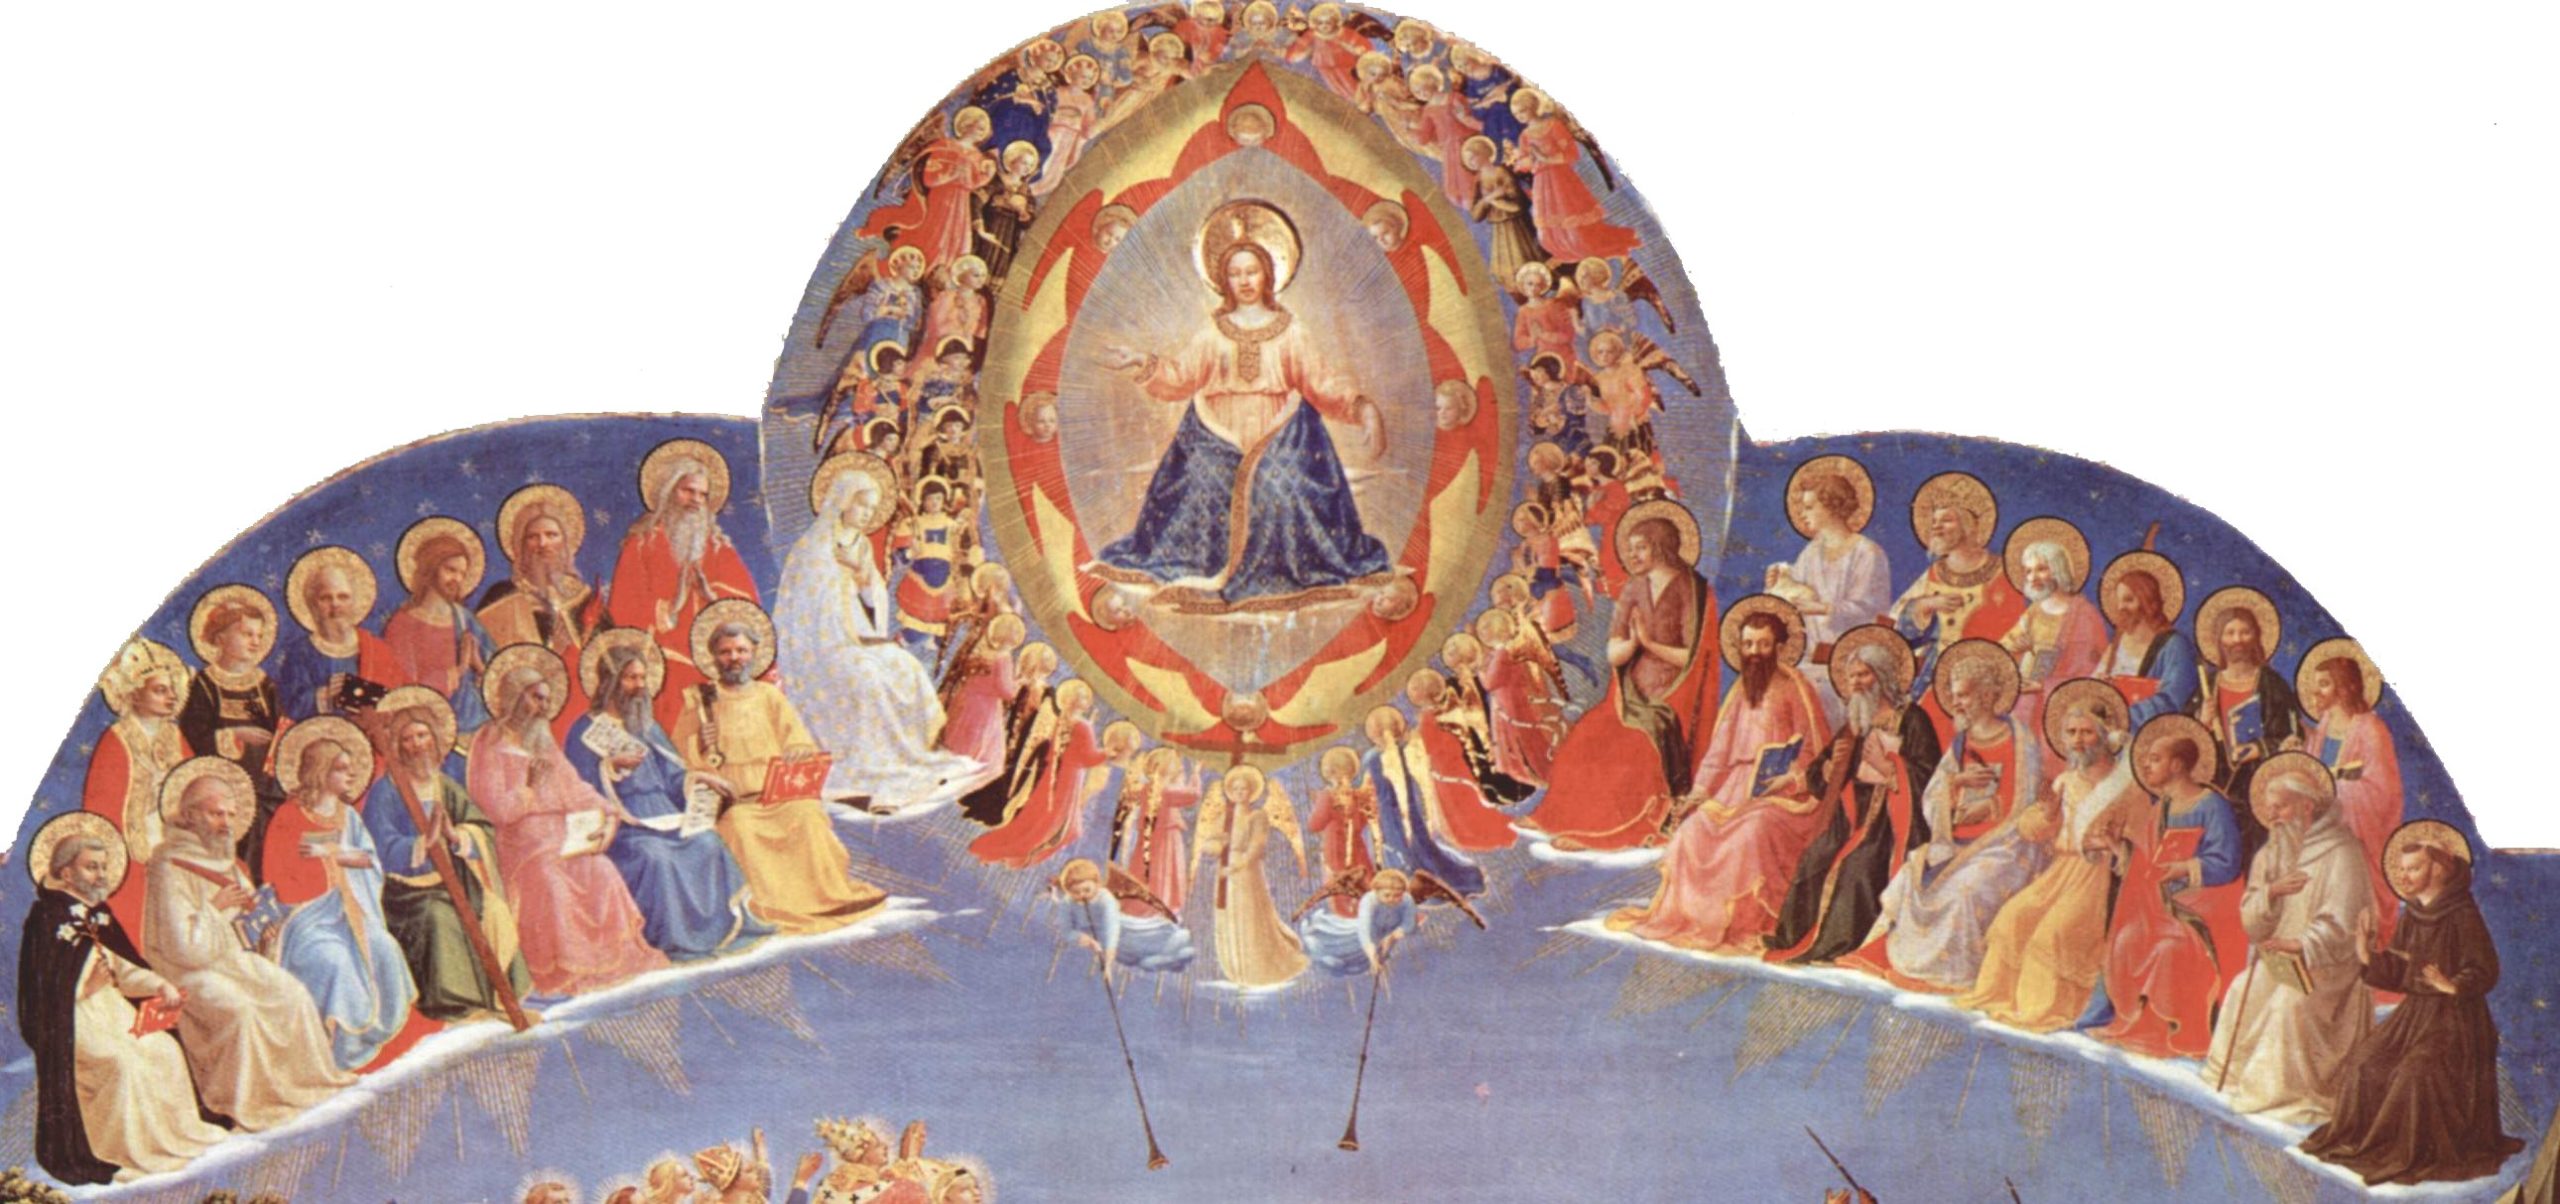 All Saints Day and Our Call to Holiness